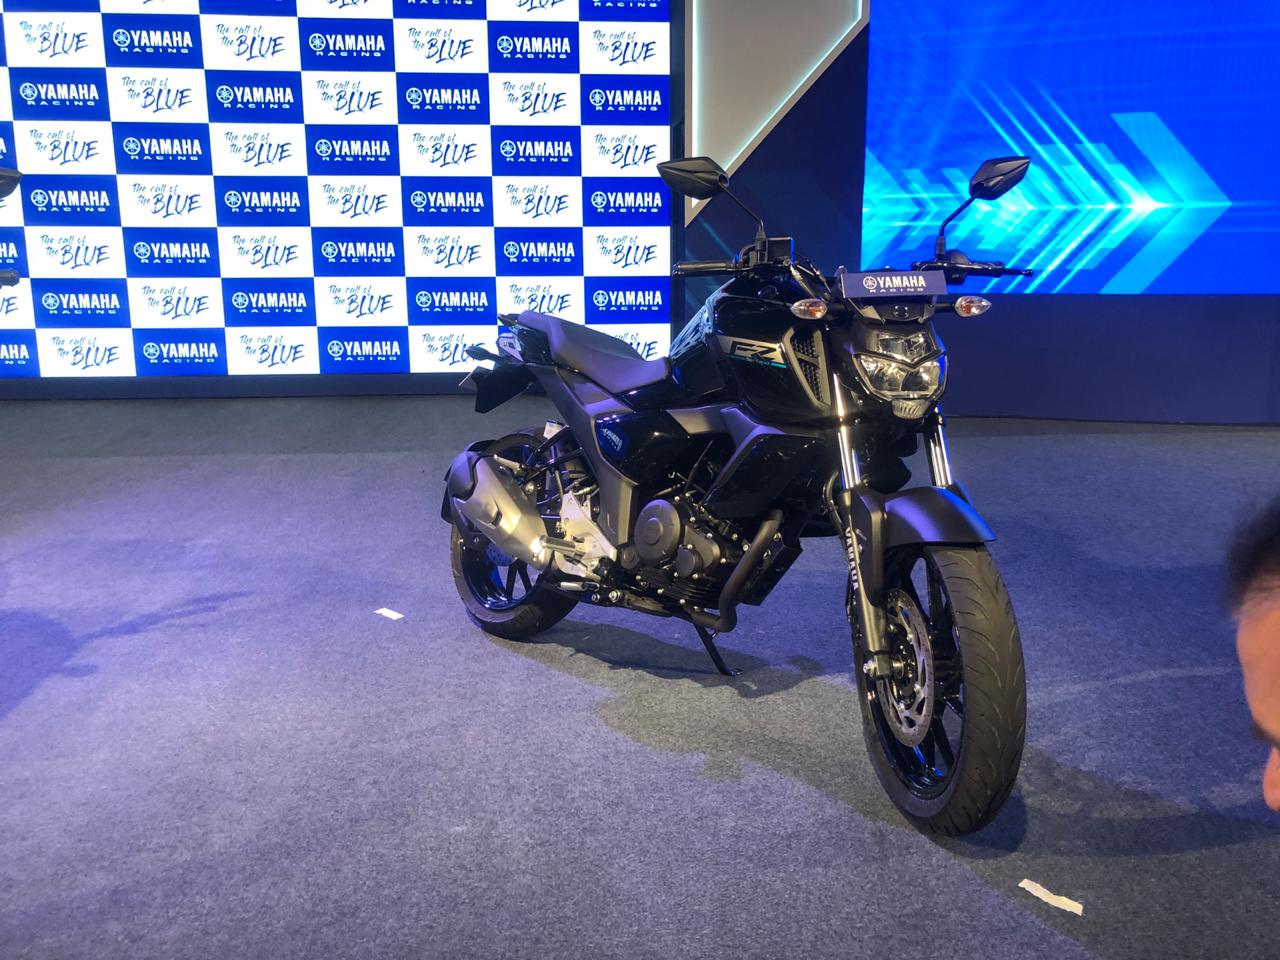 <p>Here&rsquo;s a first look at the new #Yamaha #FZ FI v3 ABS. More details in a moment</p>